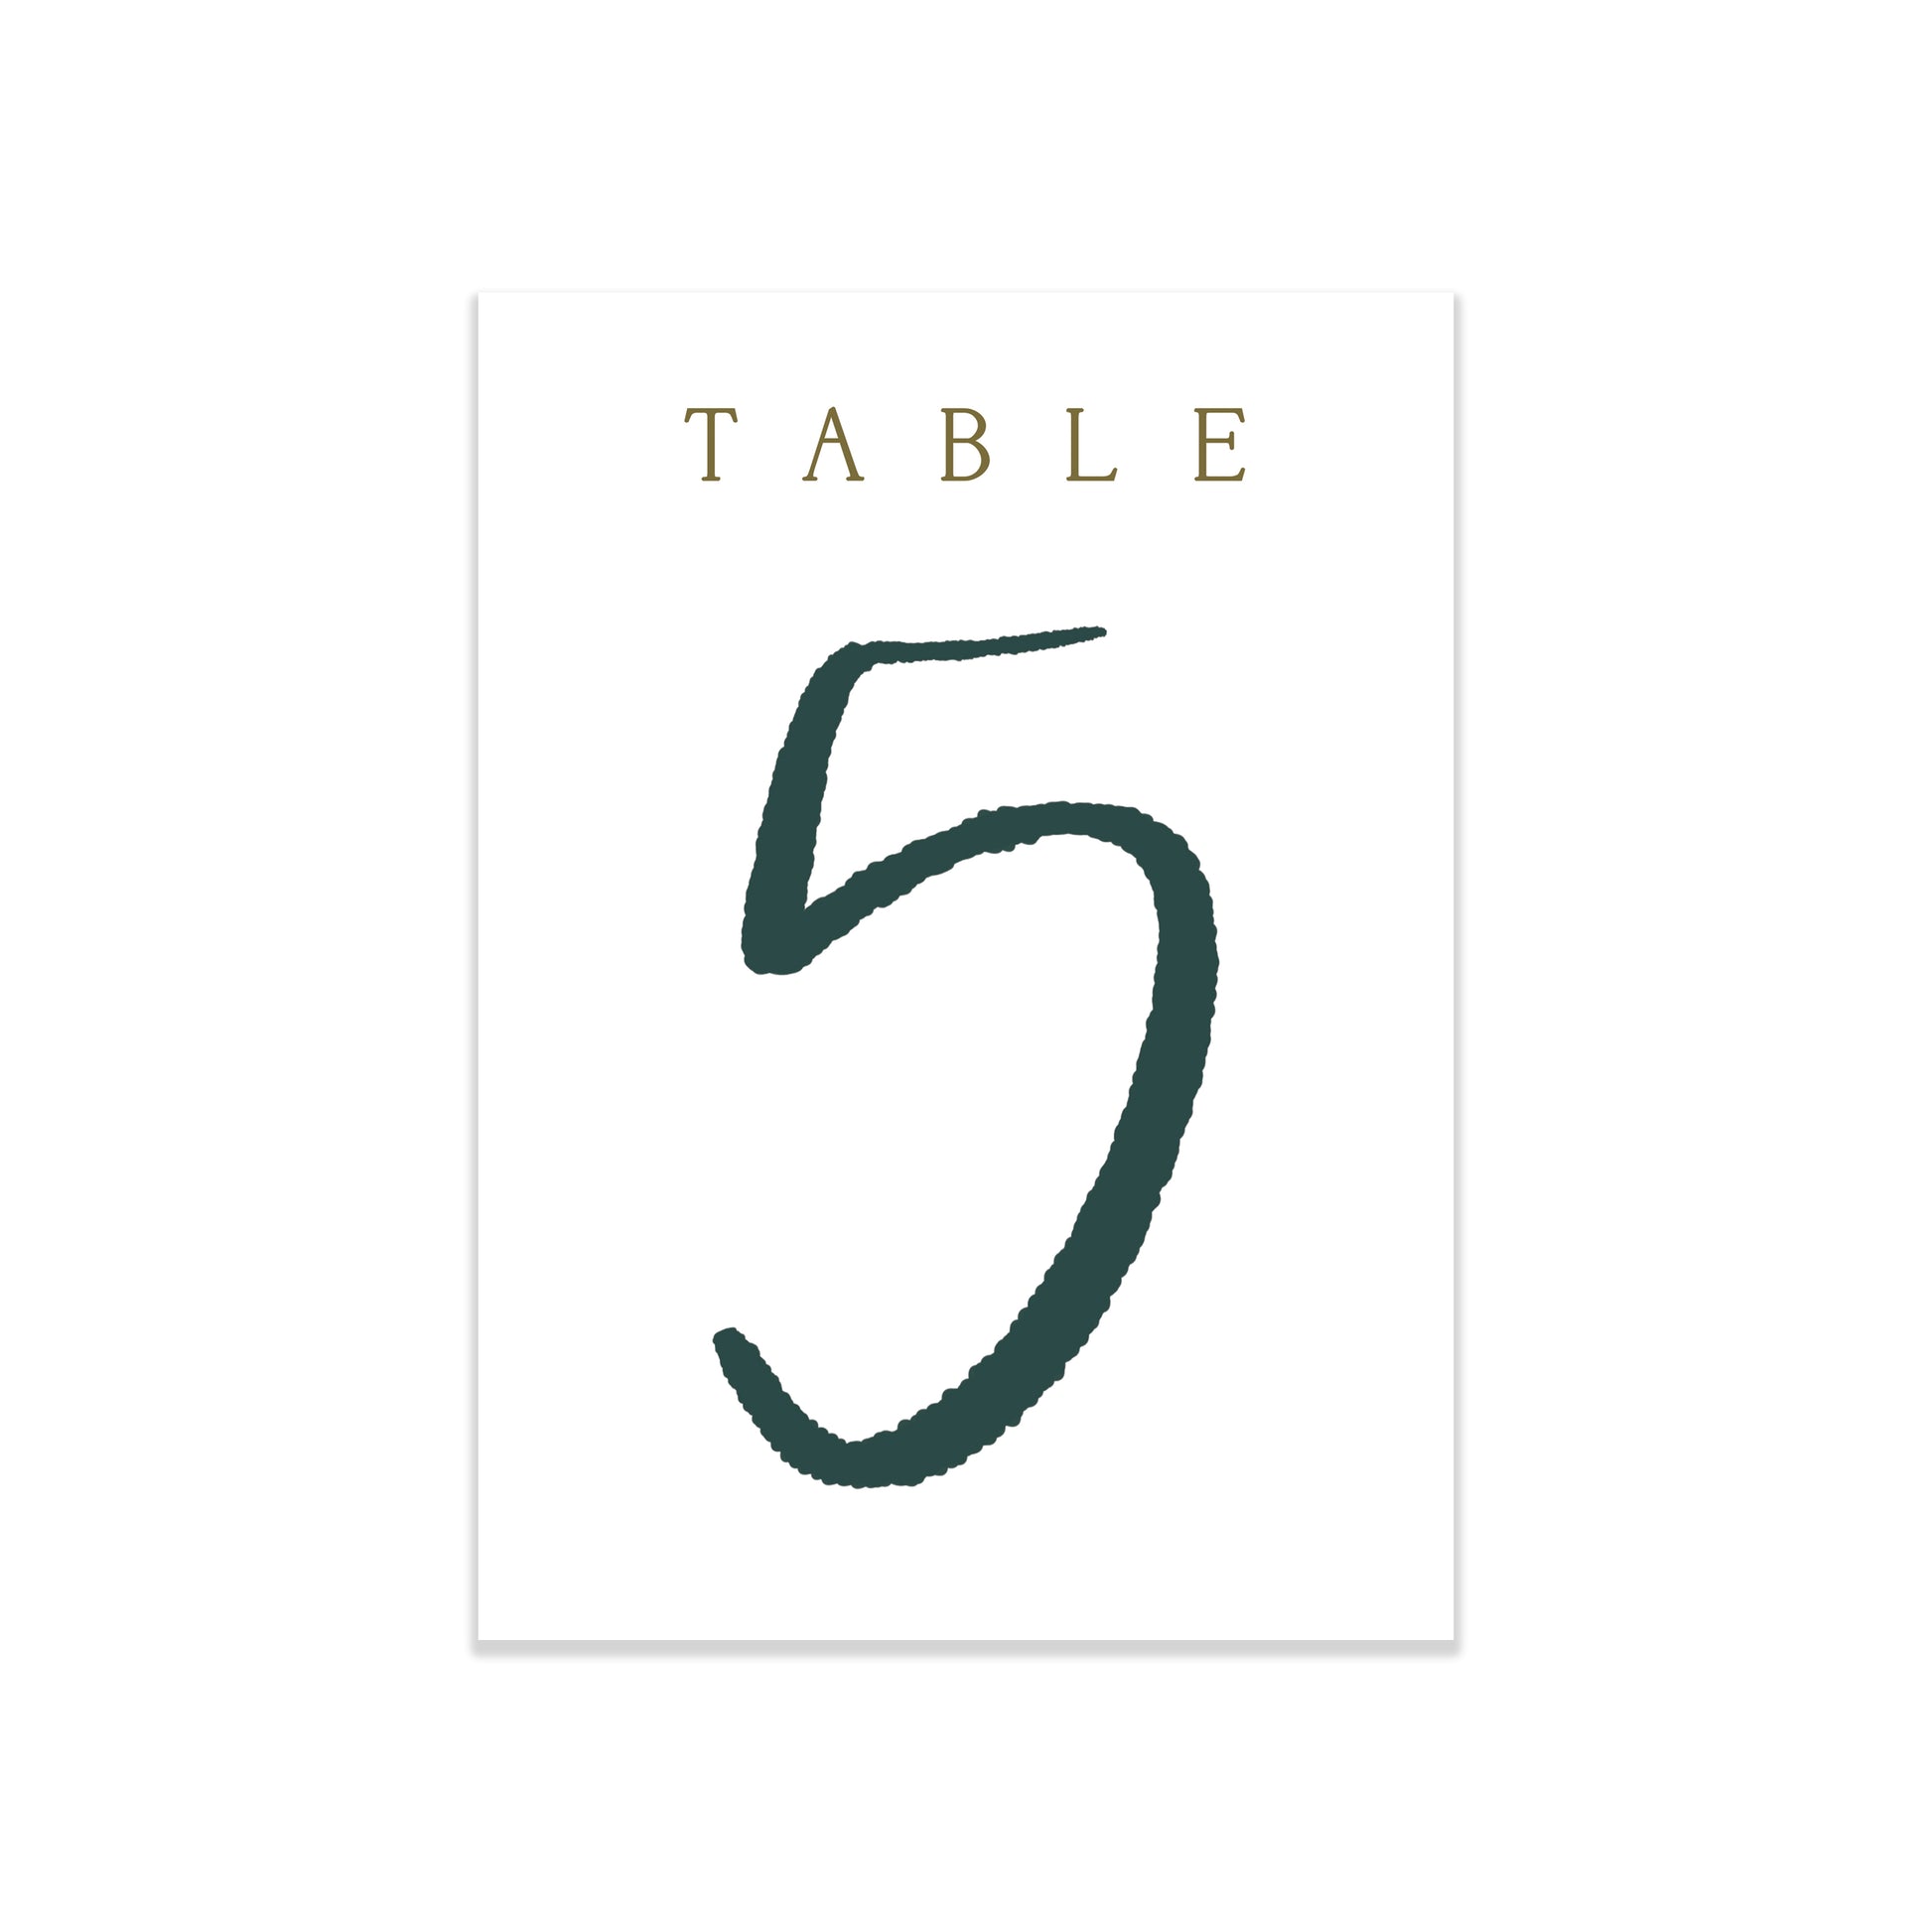 Oh Joyful Day Wedding Table Numbers Colorful table numbers wedding decorations jewel tone wedding jewel tone wedding decorations set of table numbers printed table numbers Pittsburgh weddings